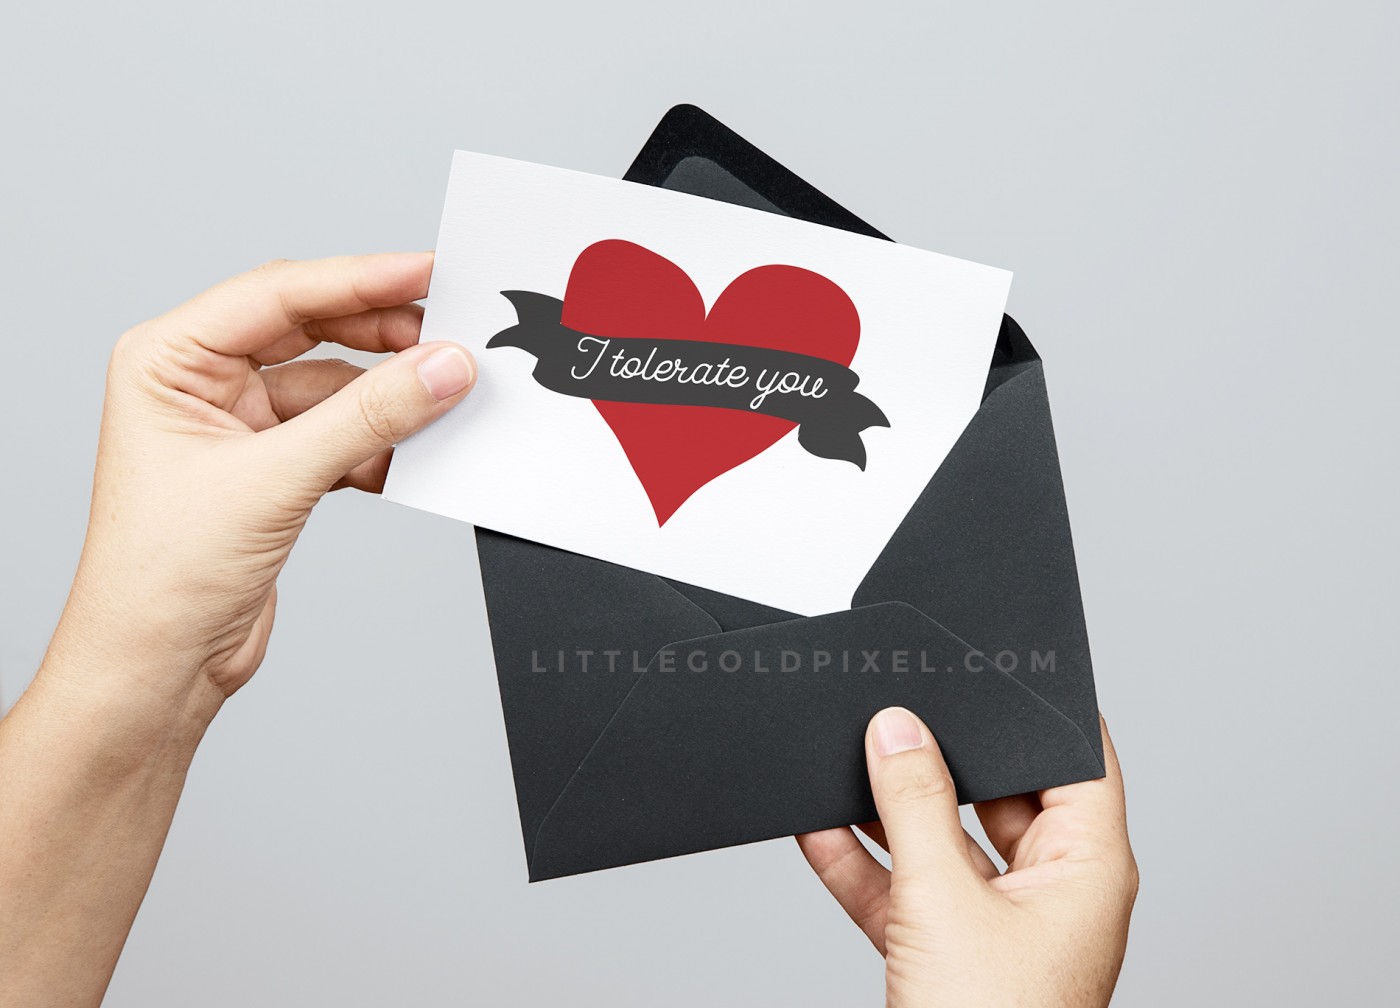 I Tolerate You Free Valentines / Freebie Fridays • Little Gold Pixel